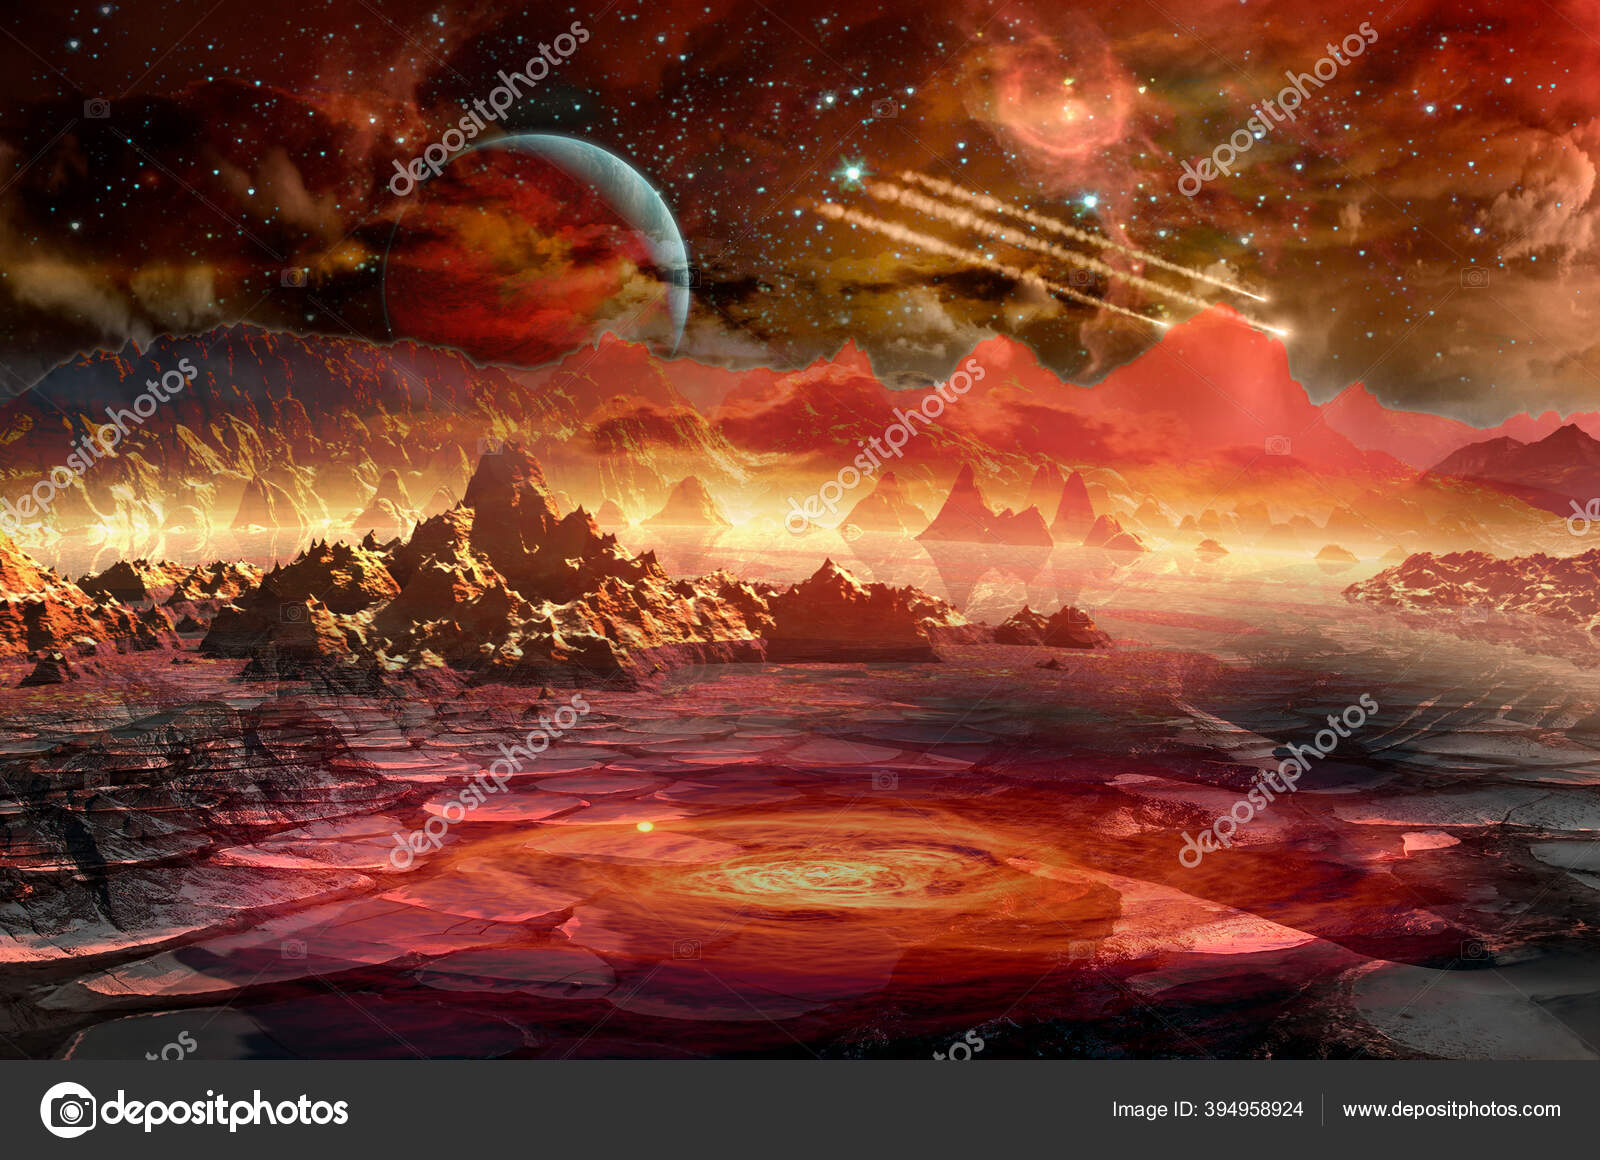 Spaceship Space Red Planet Distant Solar System Image Stock Photo by ©Elf+11 394958924